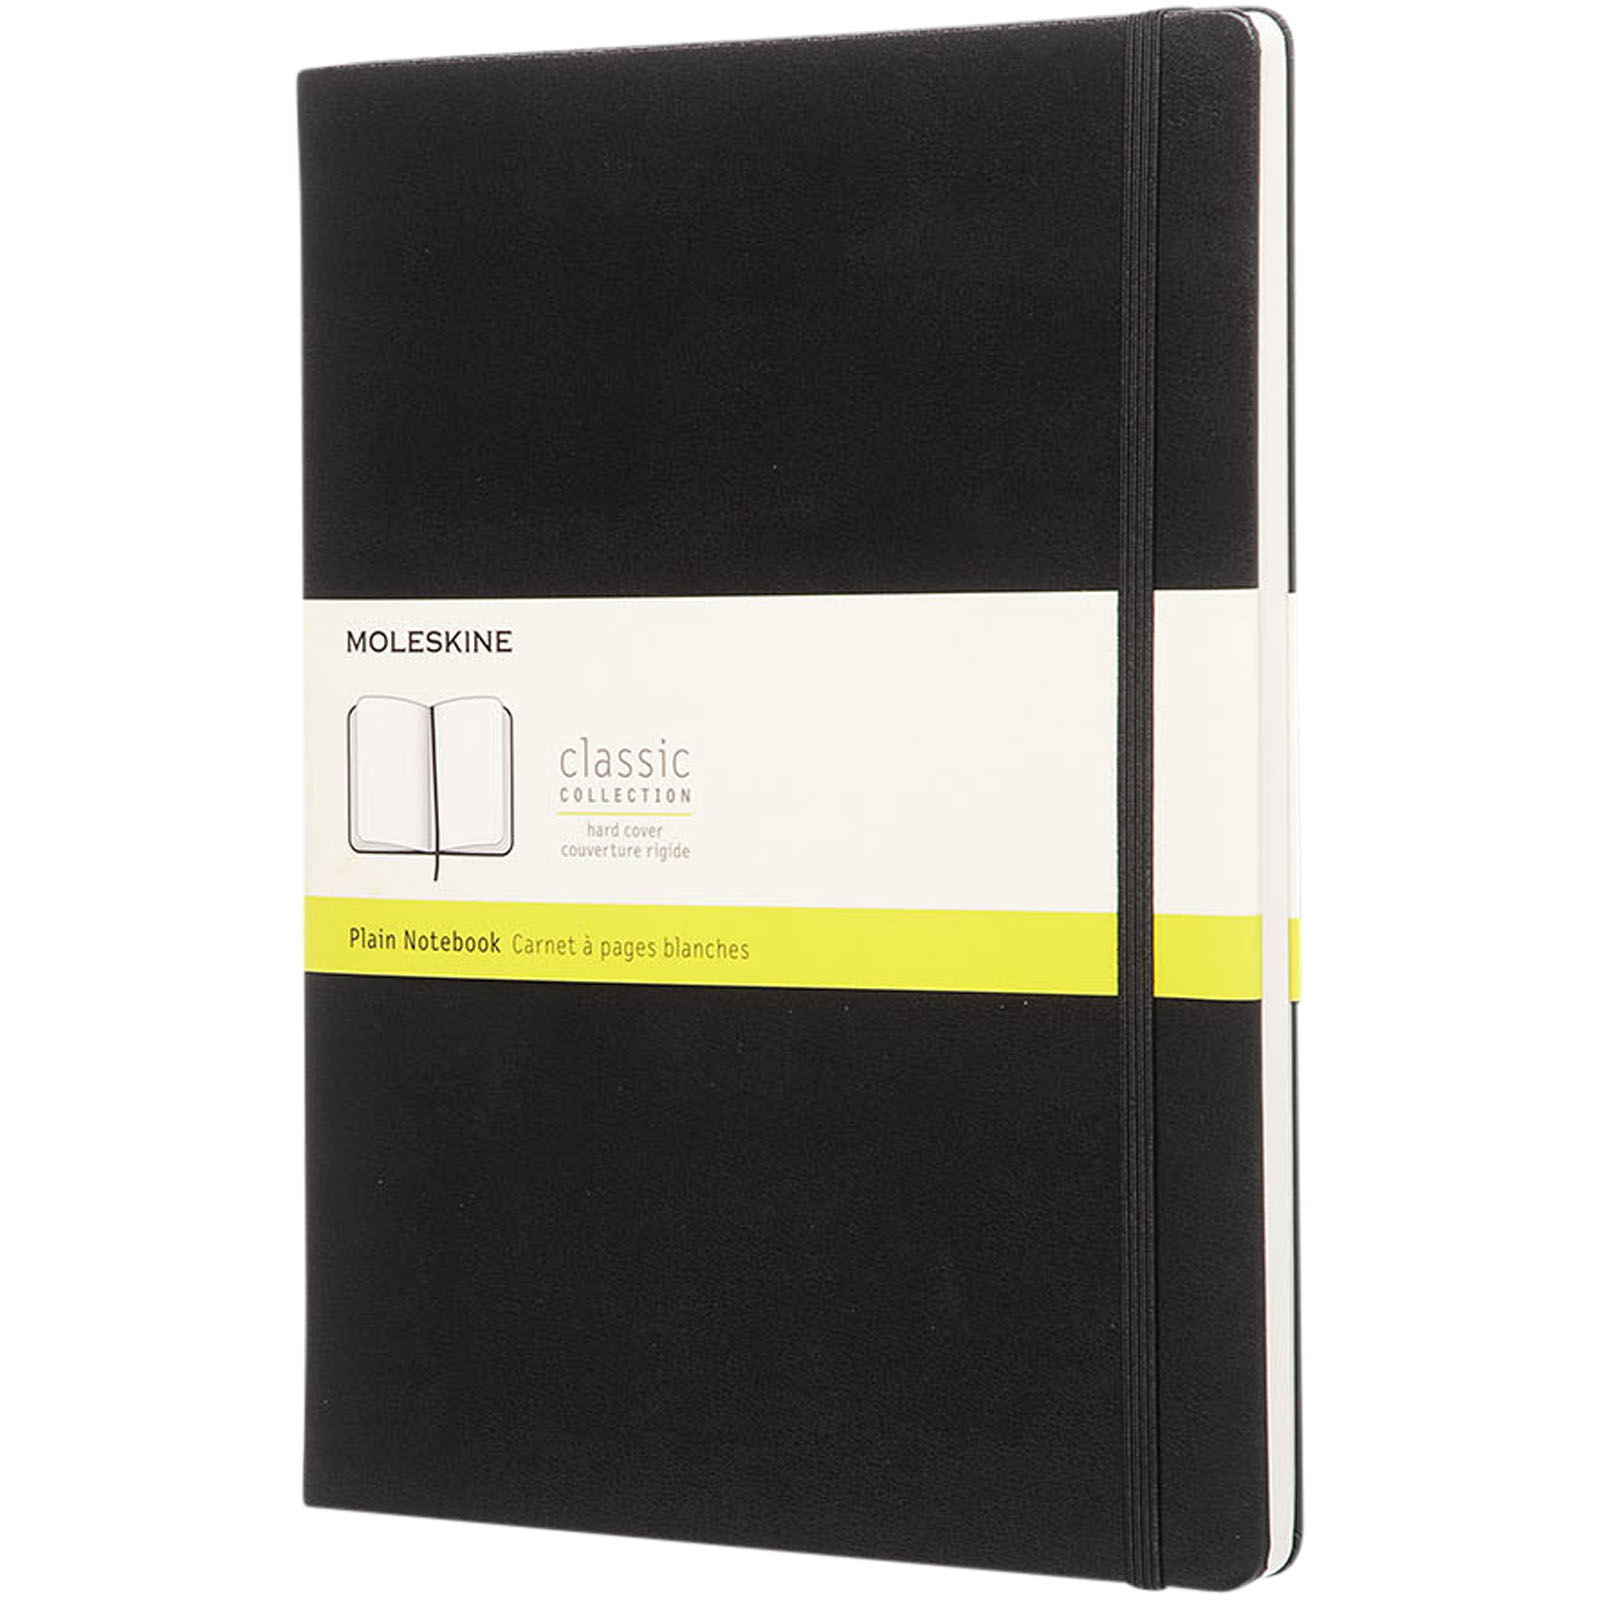 Extra Large Classic Notebook - Piddletrenthide - Inverurie